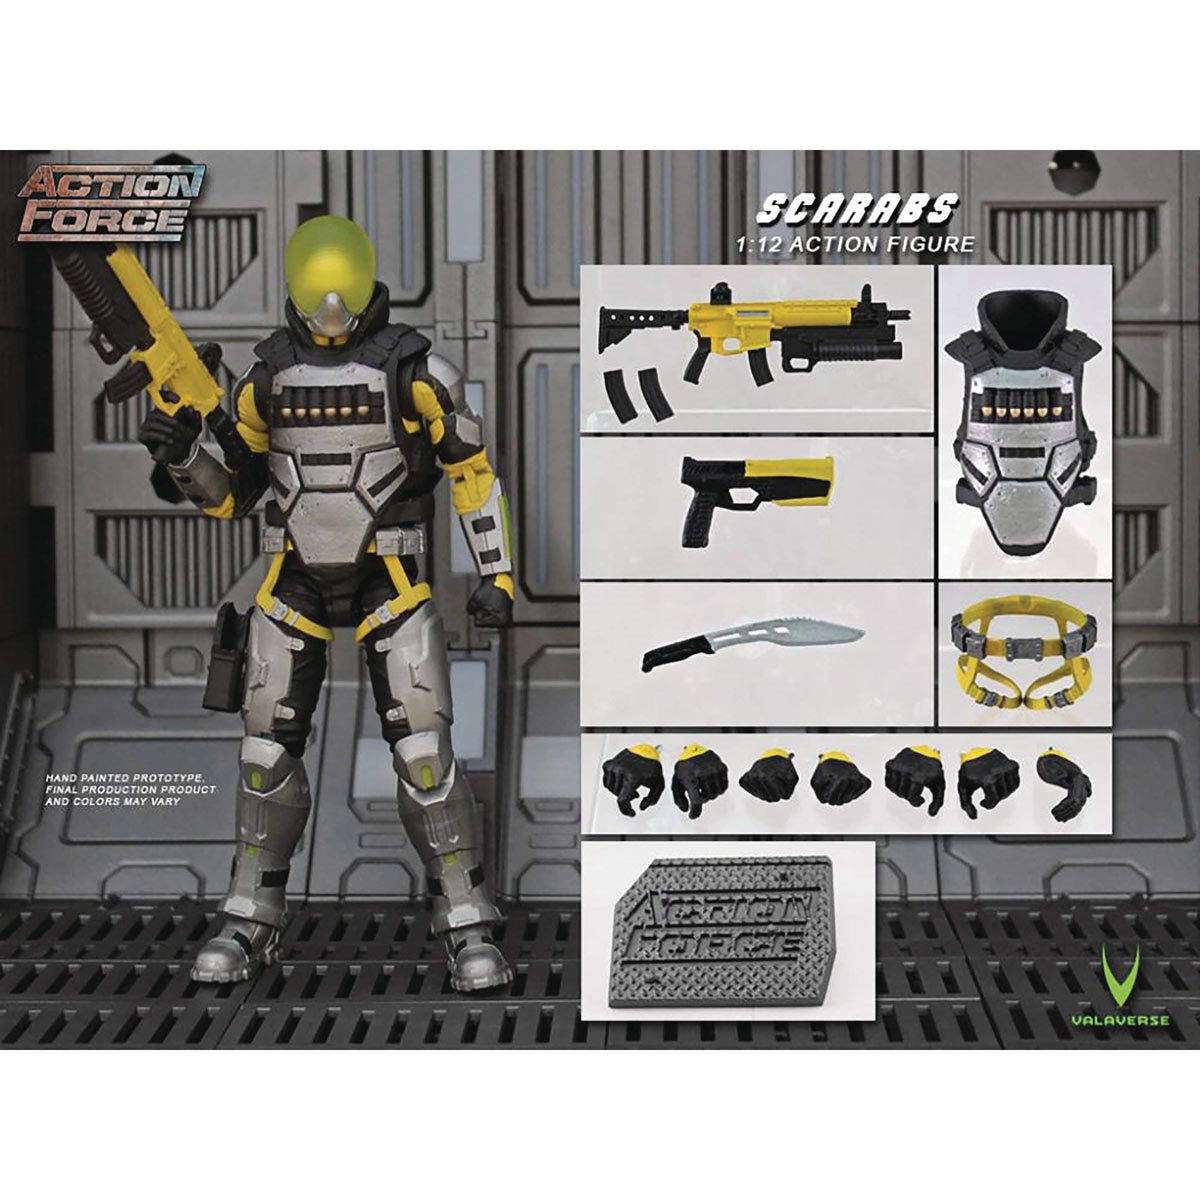 Action Force Series 2 Scarab 1:12 Scale Action Figure画像